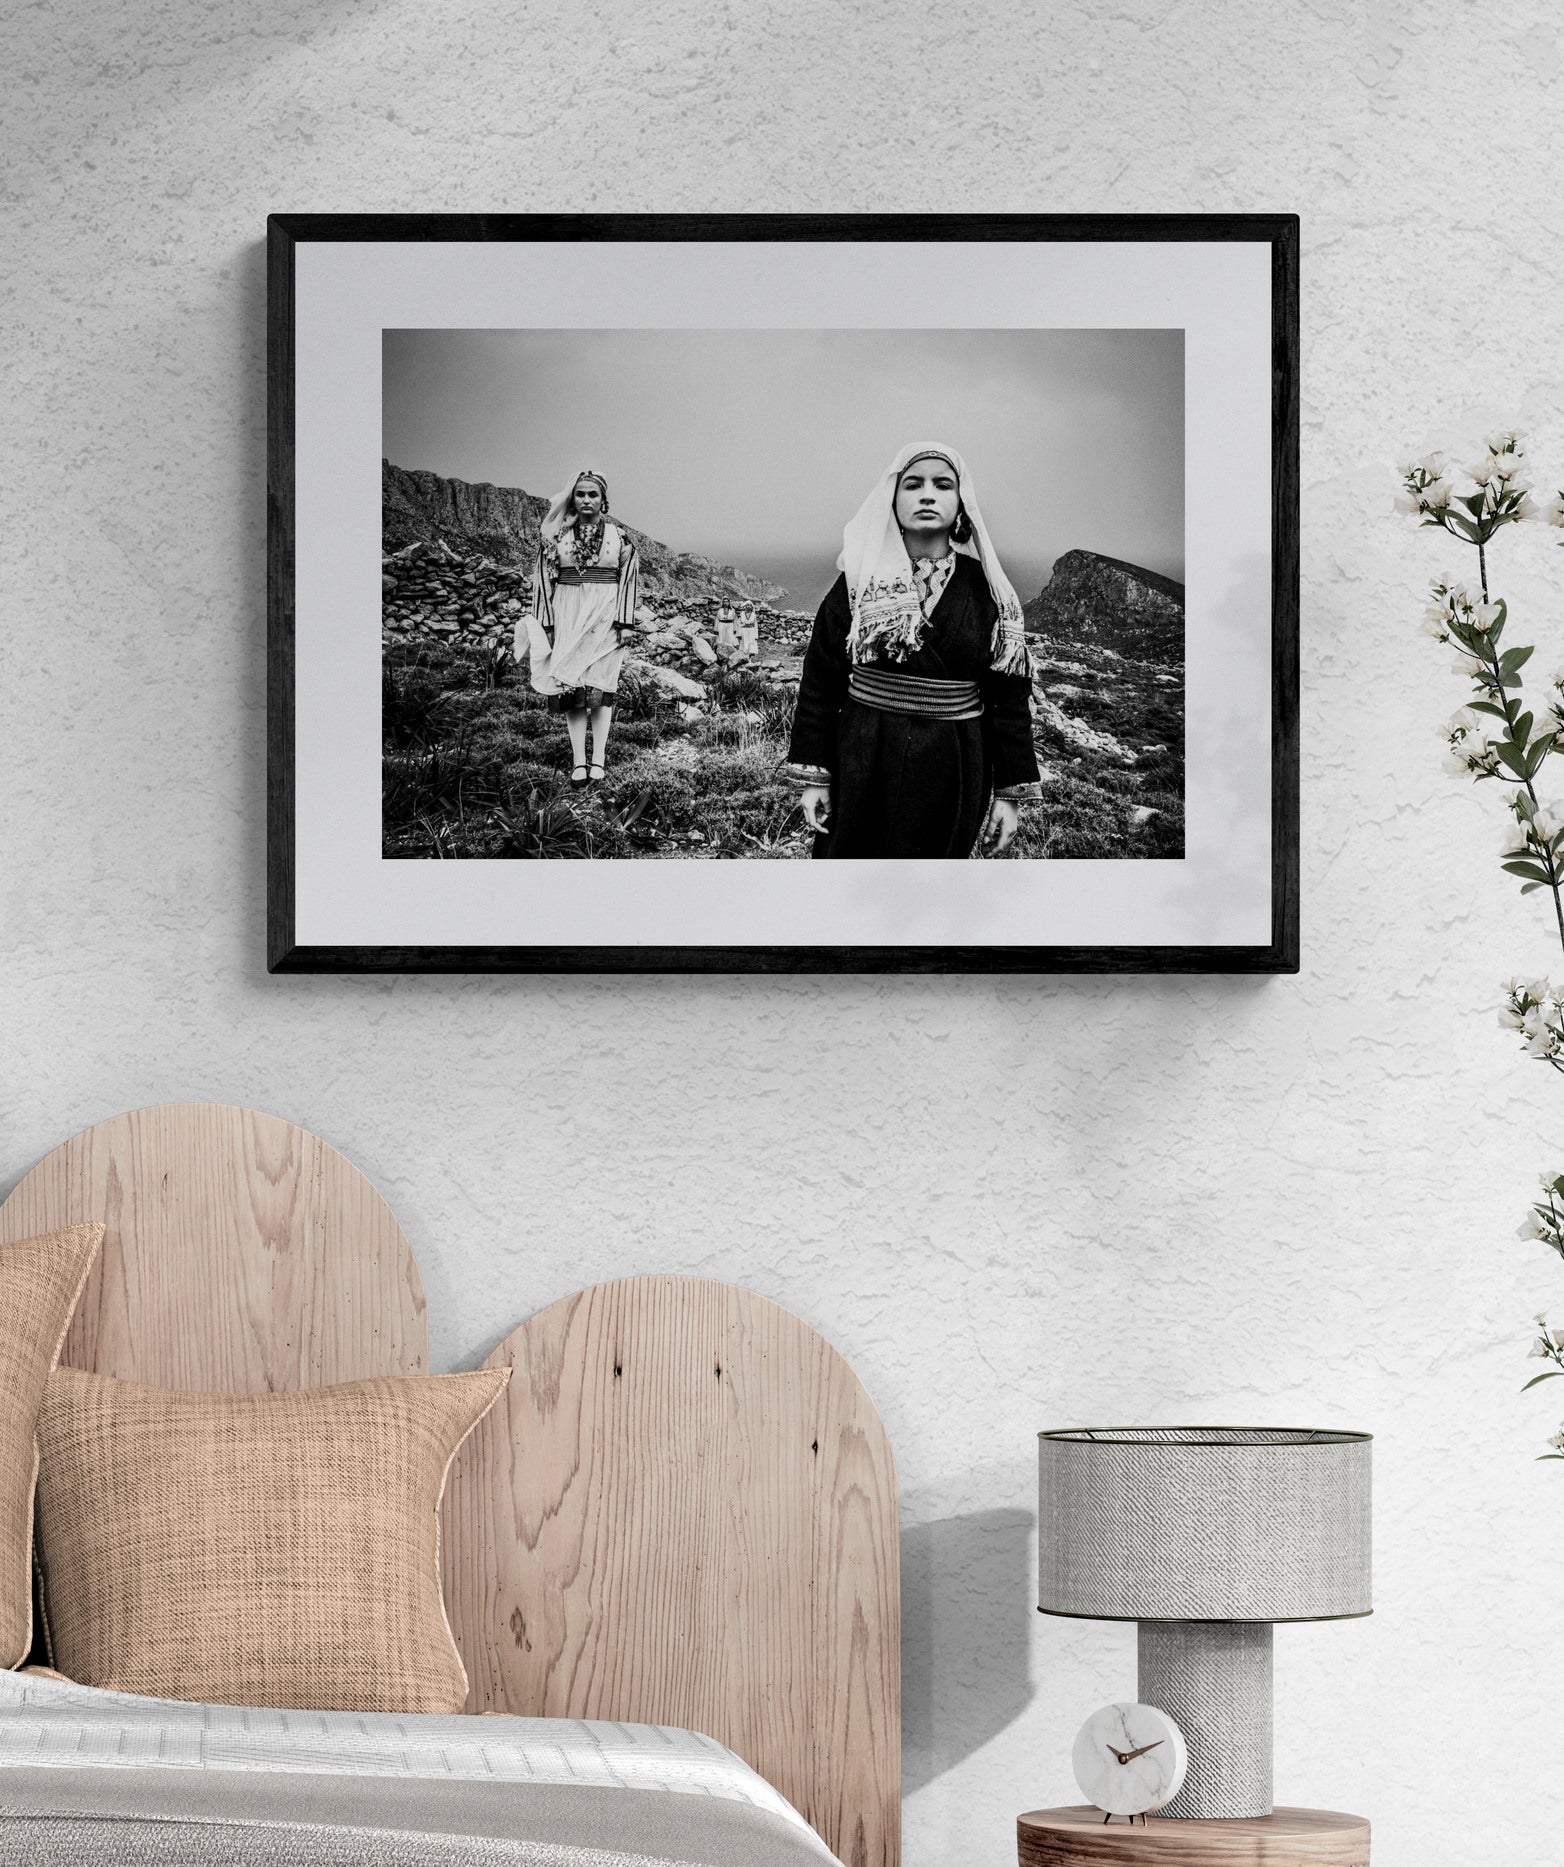 Black and White Photography Wall Art Greece | Costumes of Tilos island at a windy cliff Dodecanese Greece by George Tatakis - single framed photo